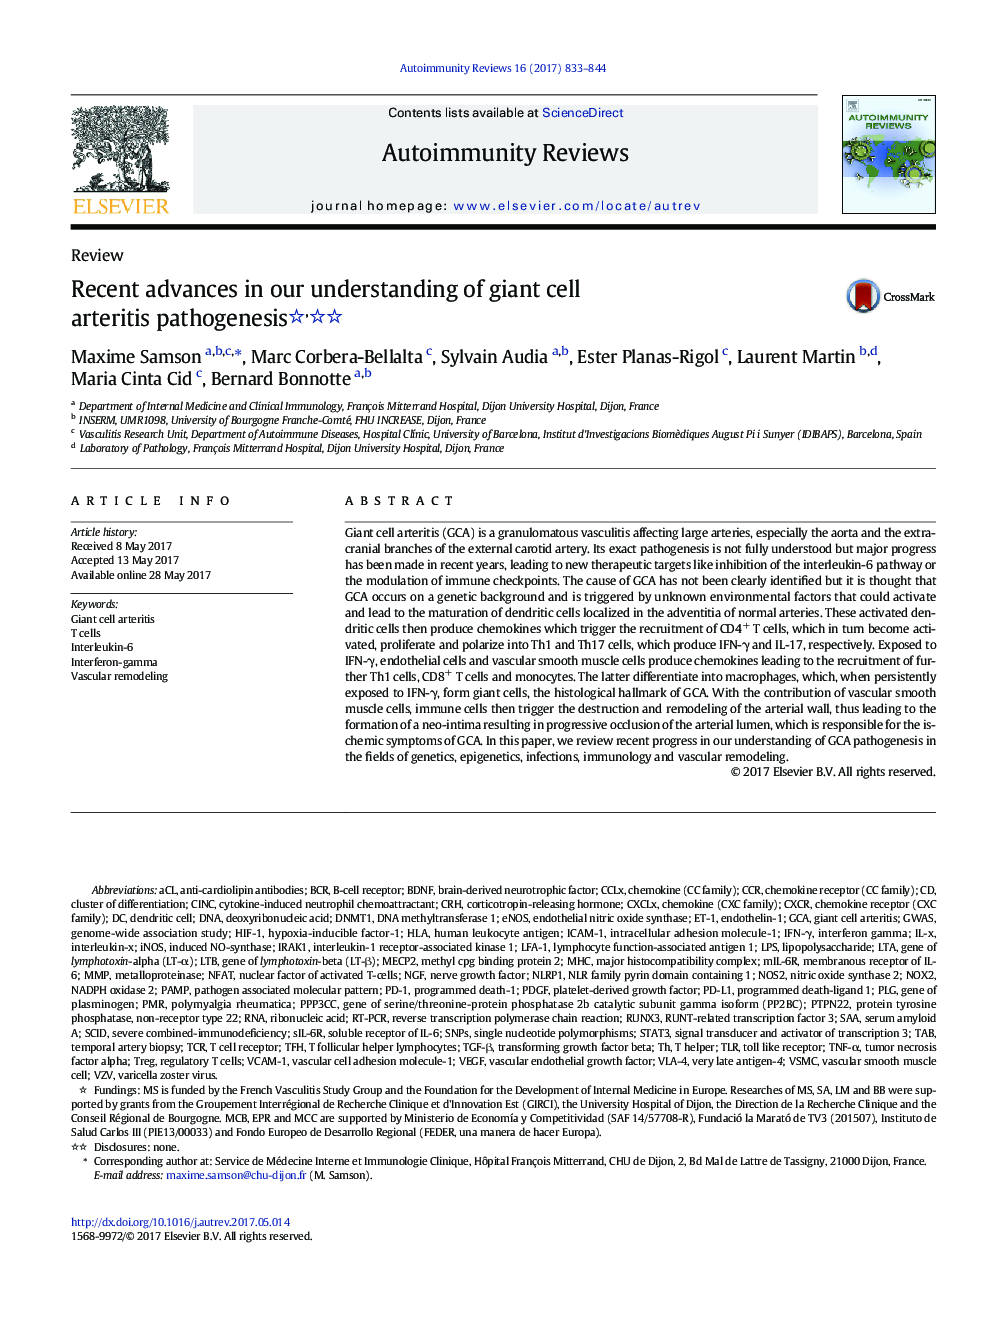 Recent advances in our understanding of giant cell arteritis pathogenesis